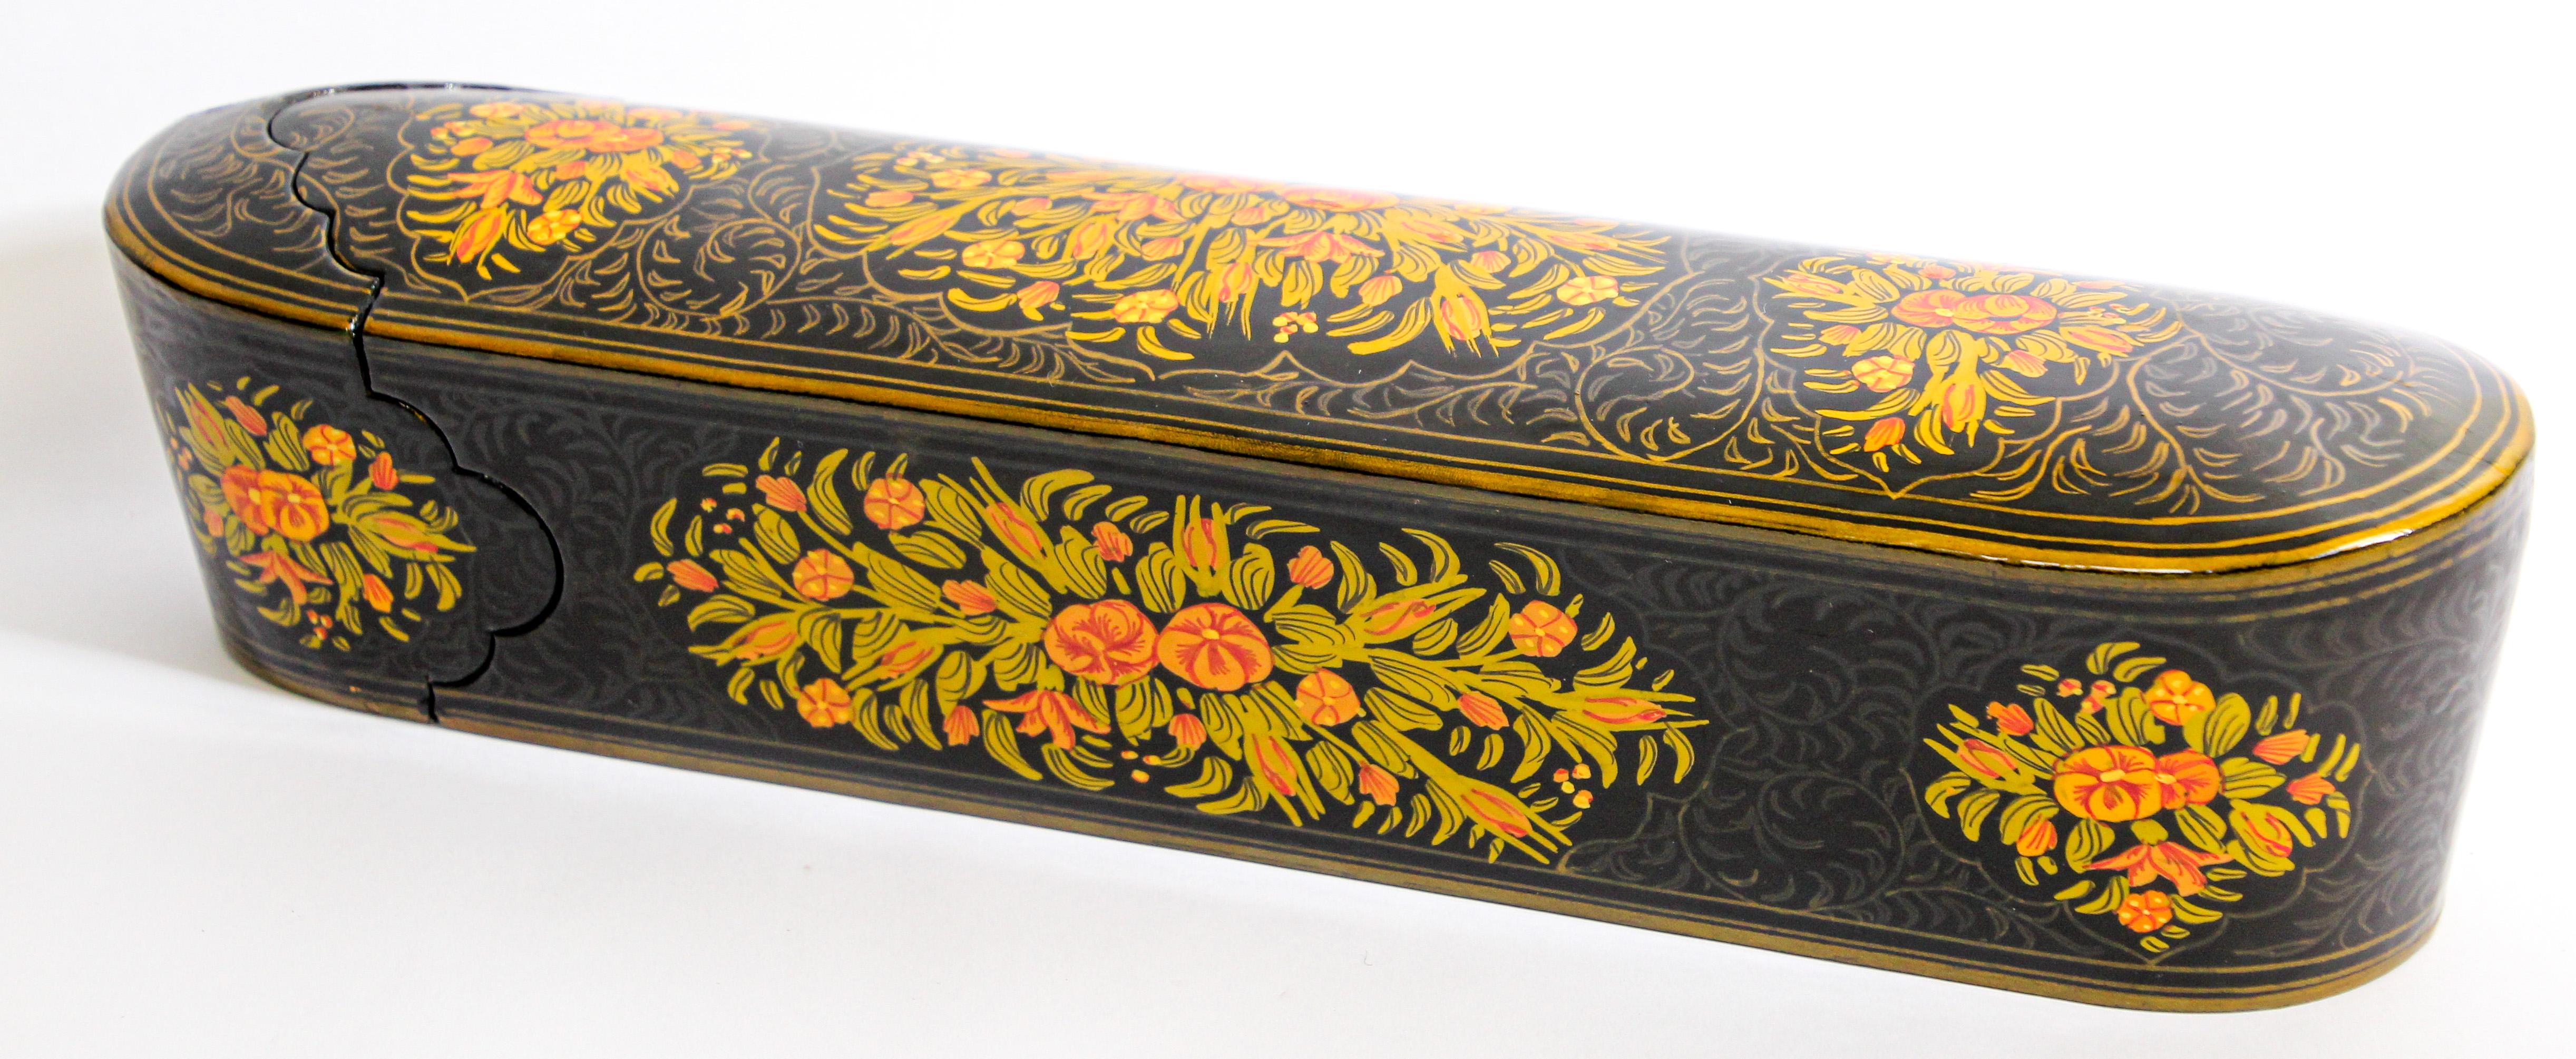 Indo Persian Lacquer Pen Box Hand Painted with Floral Design 2